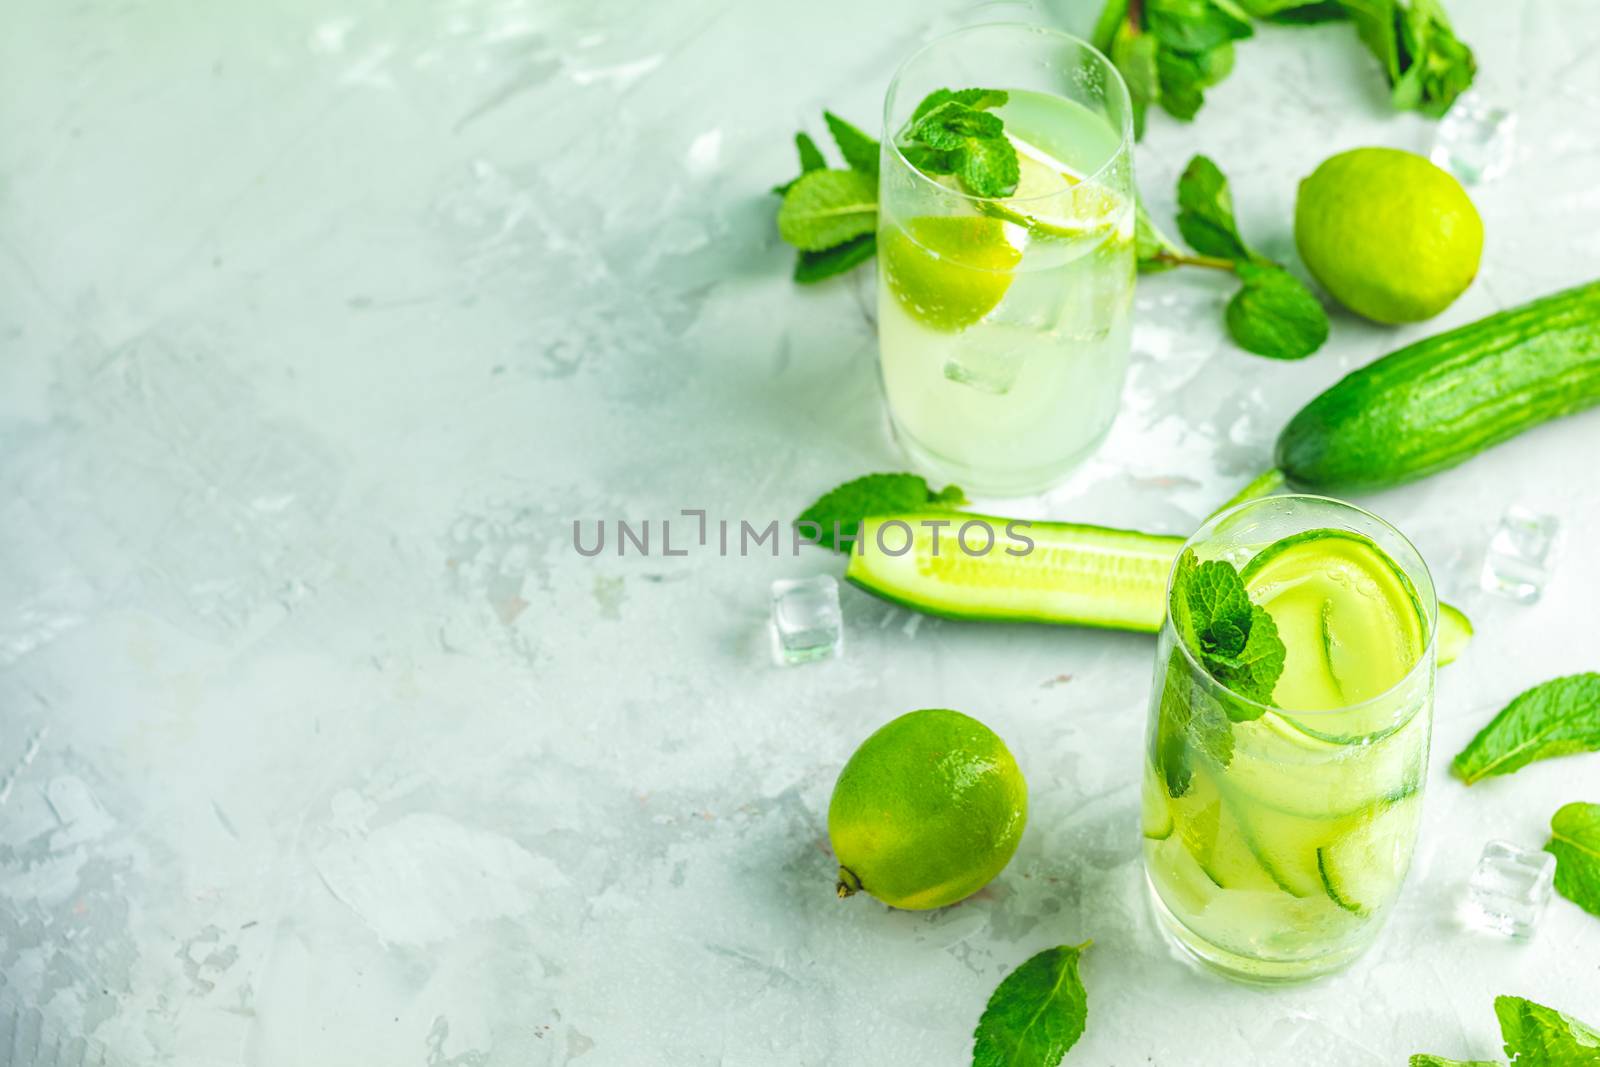 Detox cocktail of mint, cucumber and lemon and mojito cocktail with lime and mint in highball glasses on a gray concrete stone surface background. With copy space for your text